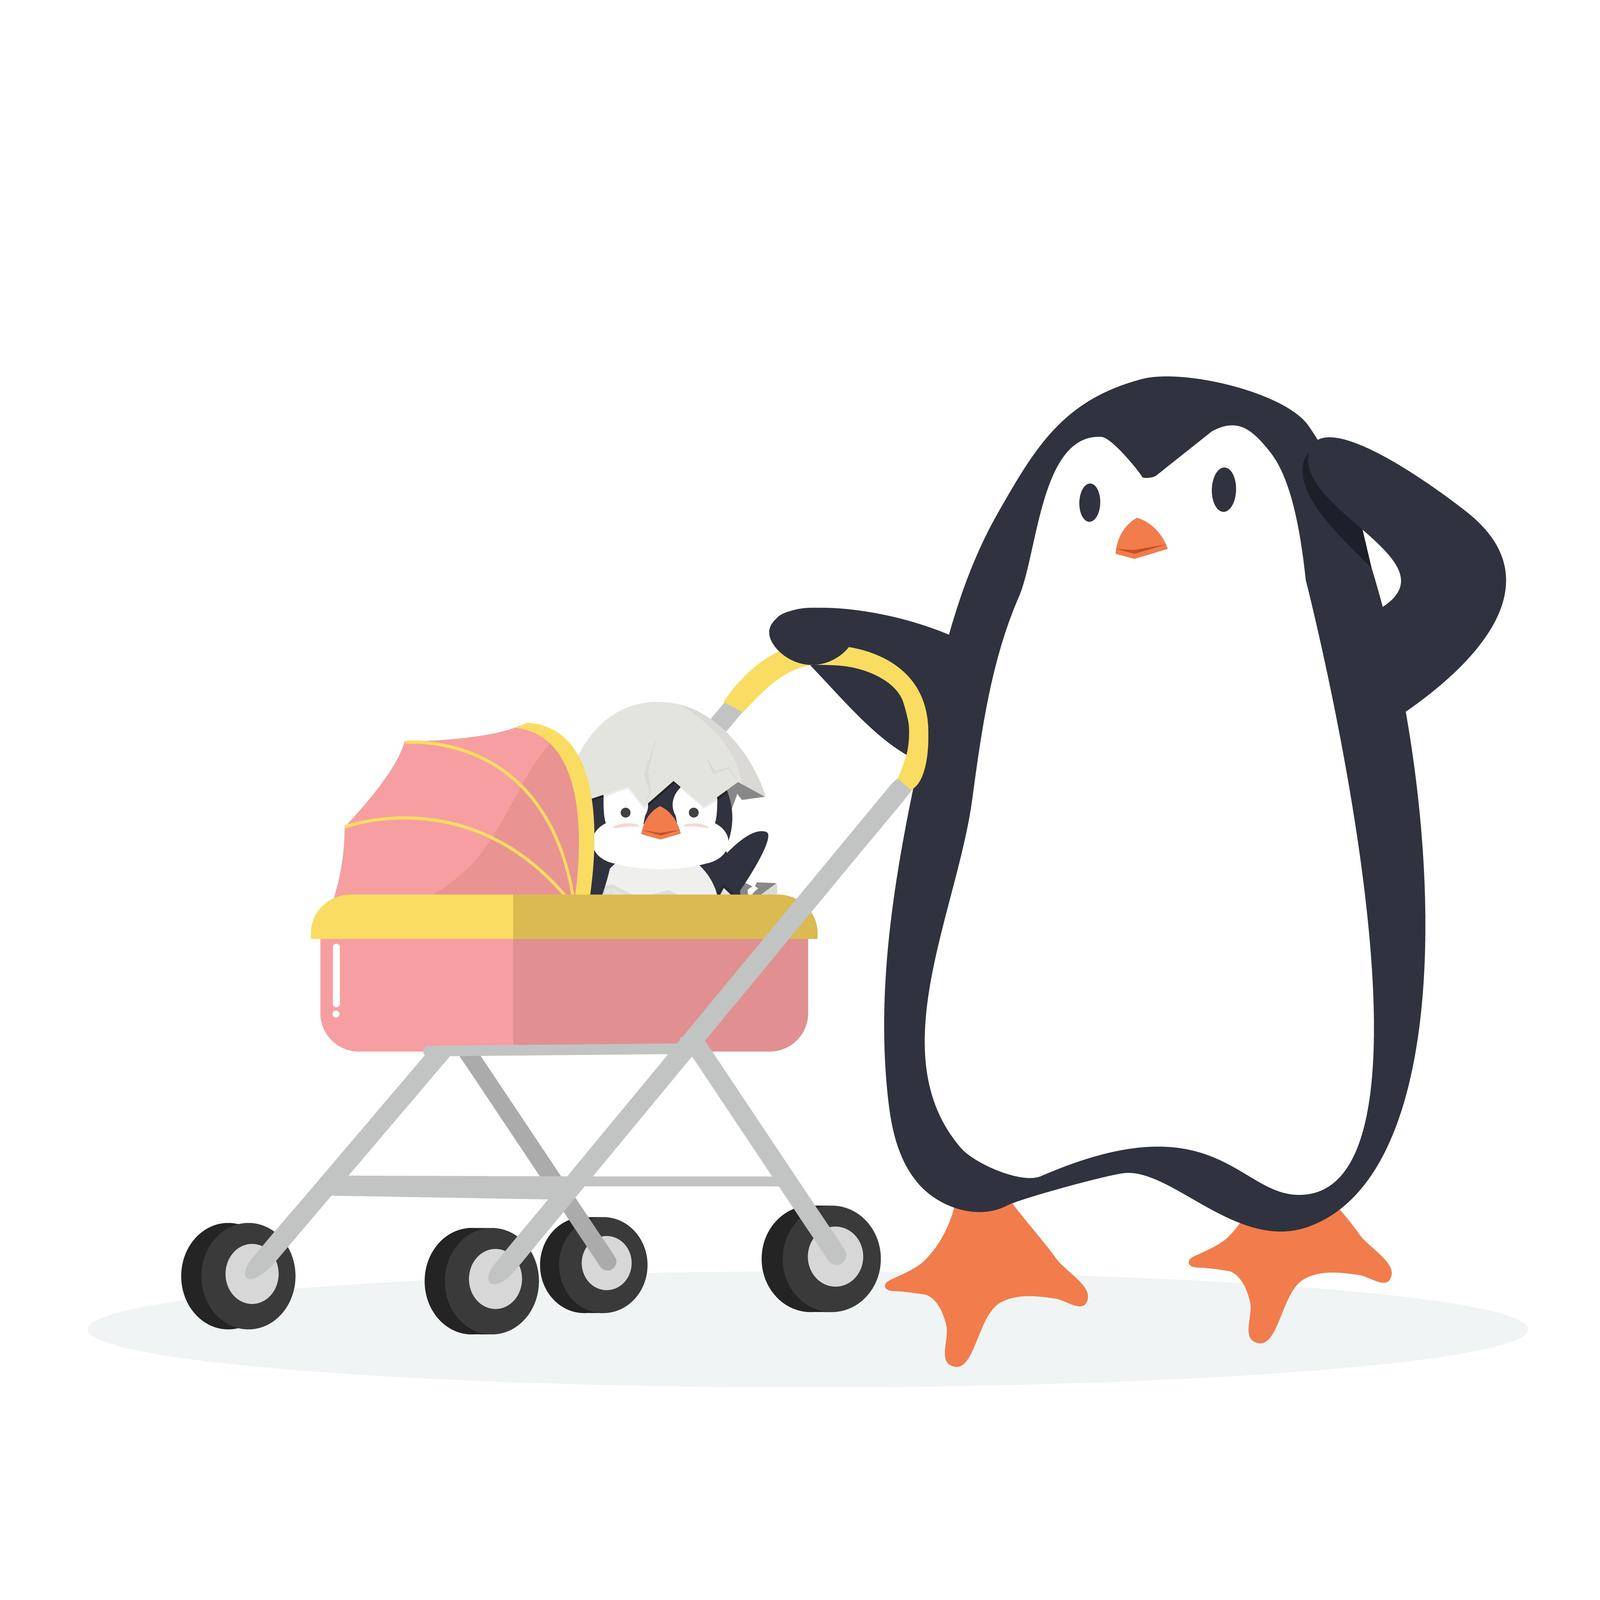 penguin with Baby penguin Carriage